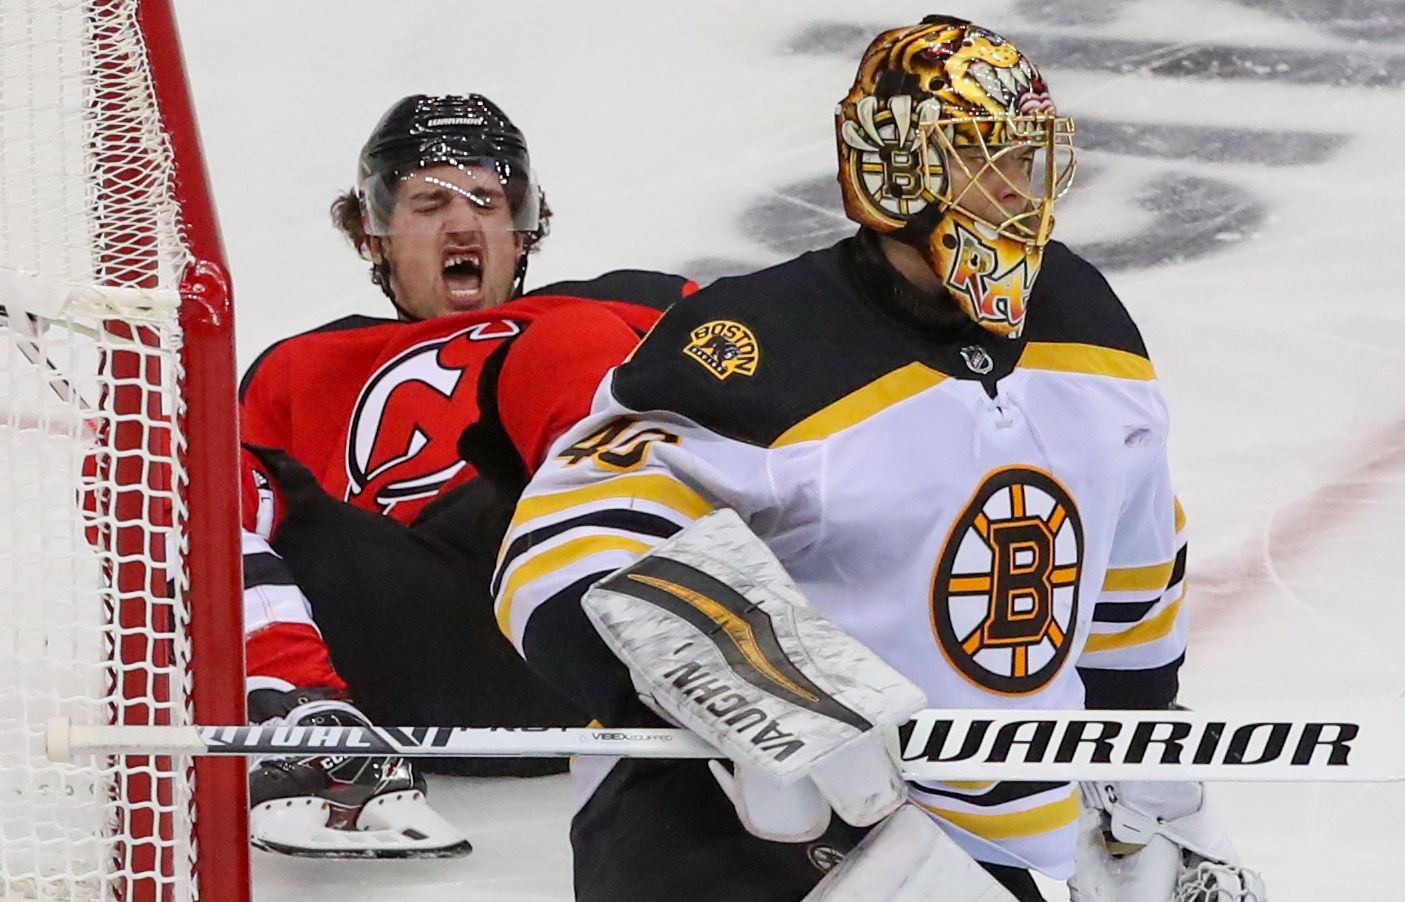 Devils vs. Bruins live stream: TV channel, how to watch